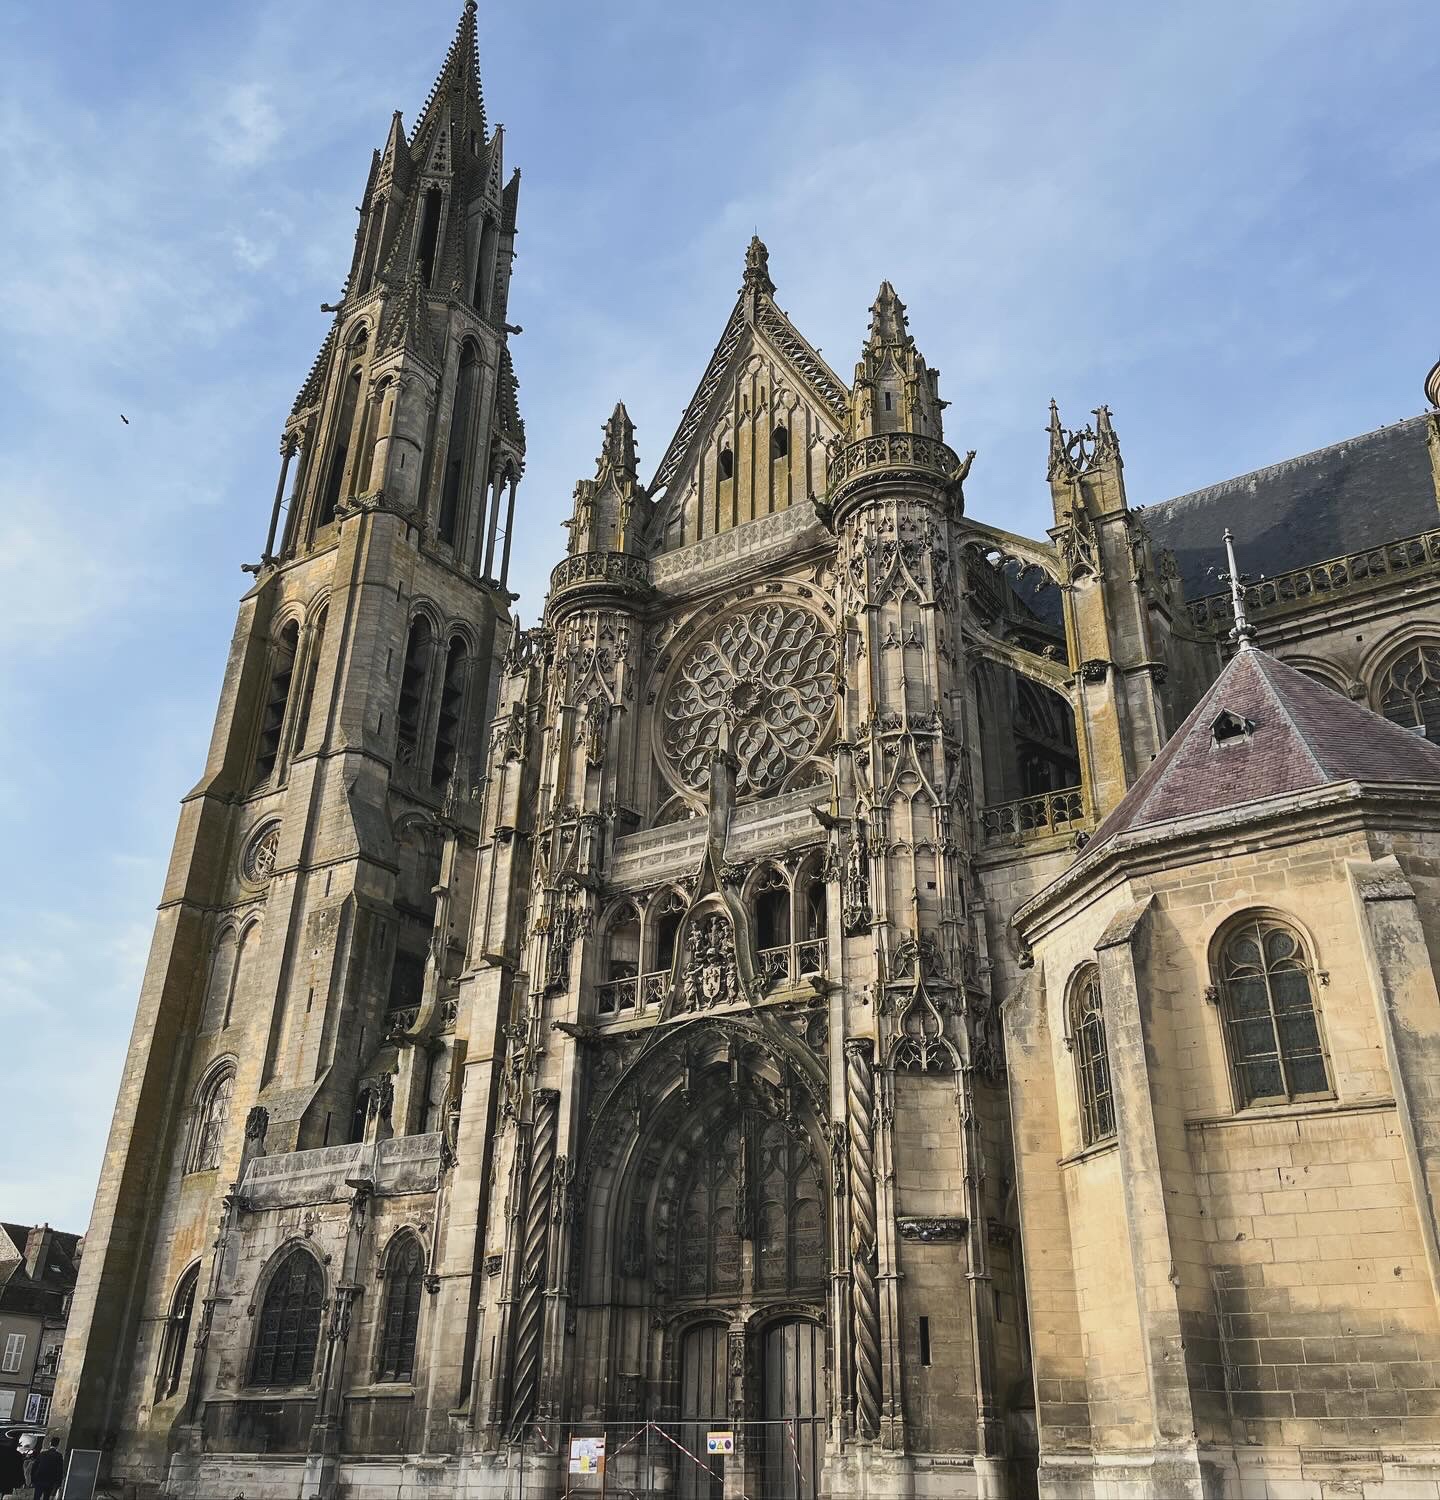 The Cathedral in Senlis is one of the smallest ones in France.